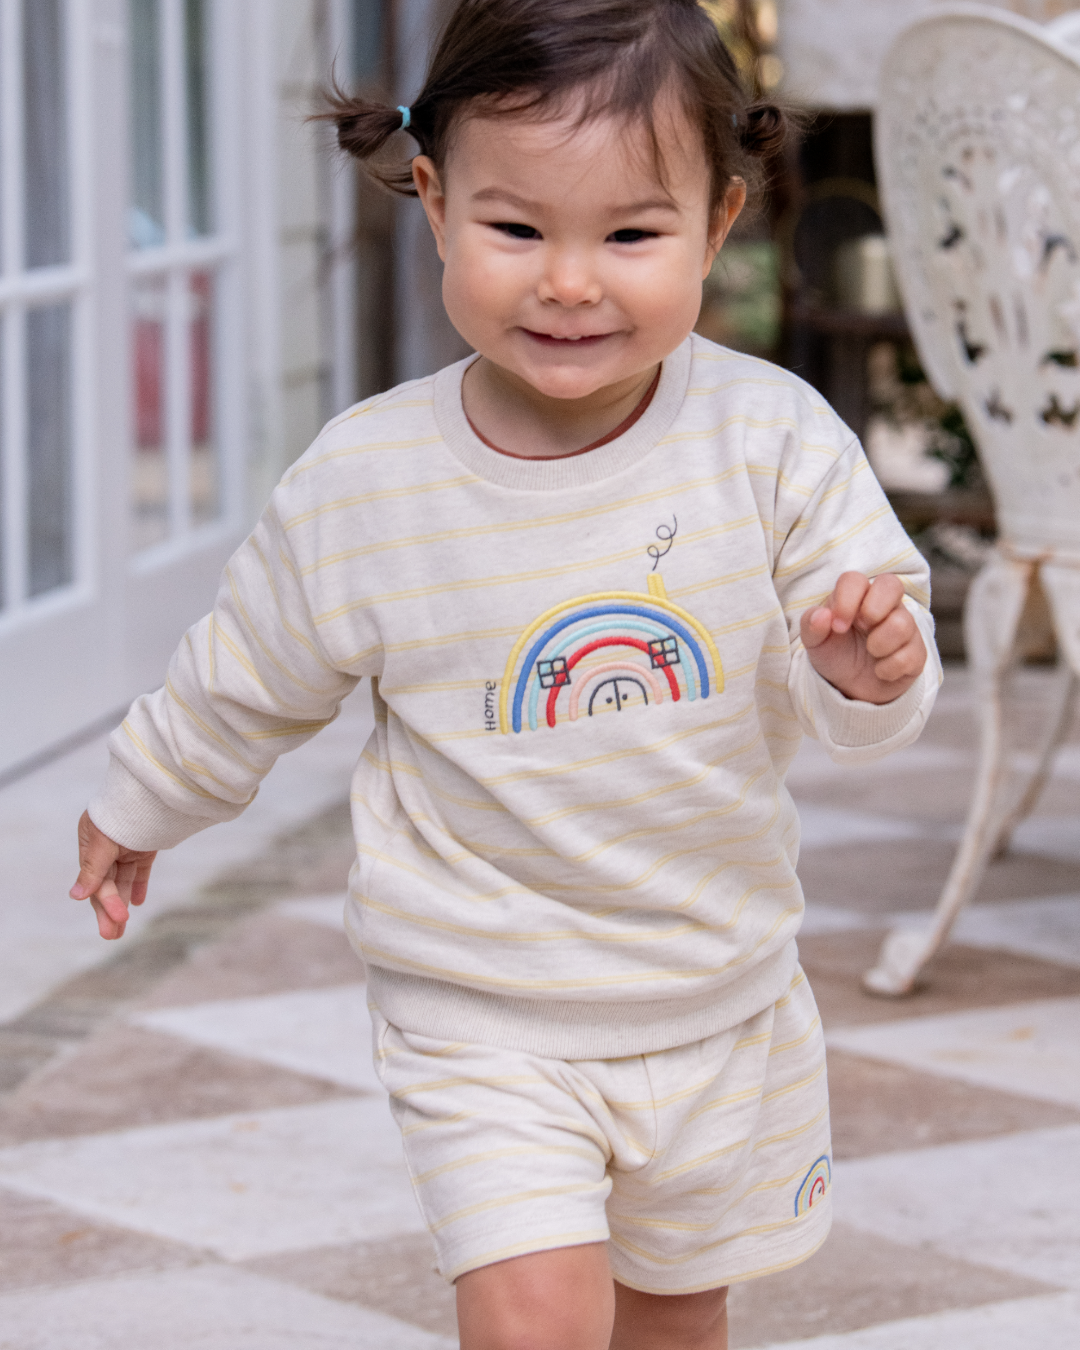 Purebaby on-talent image in Nicole Warne x Purebaby for Adopt Change collection